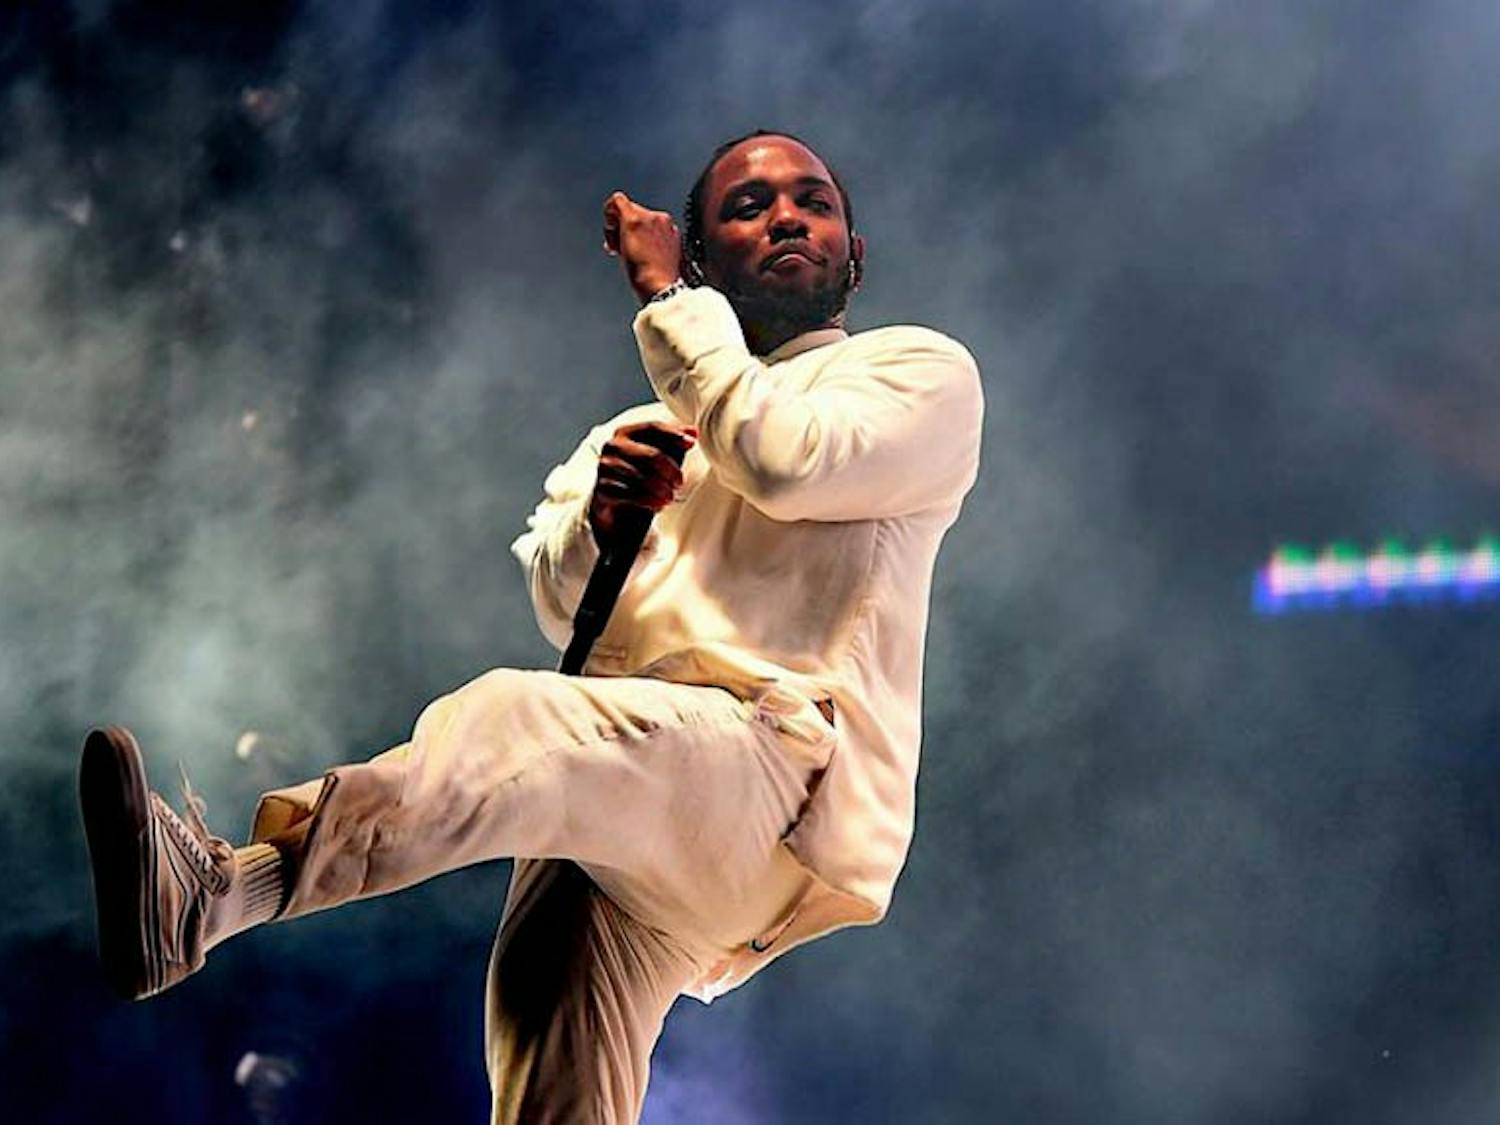 Rapper Kendrick Lamar performs on the Coachella Stage during day three, weekend one of the Coachella Valley Music And Arts Festival at the Empire Polo Club on April 16, 2017 in Indio, California.